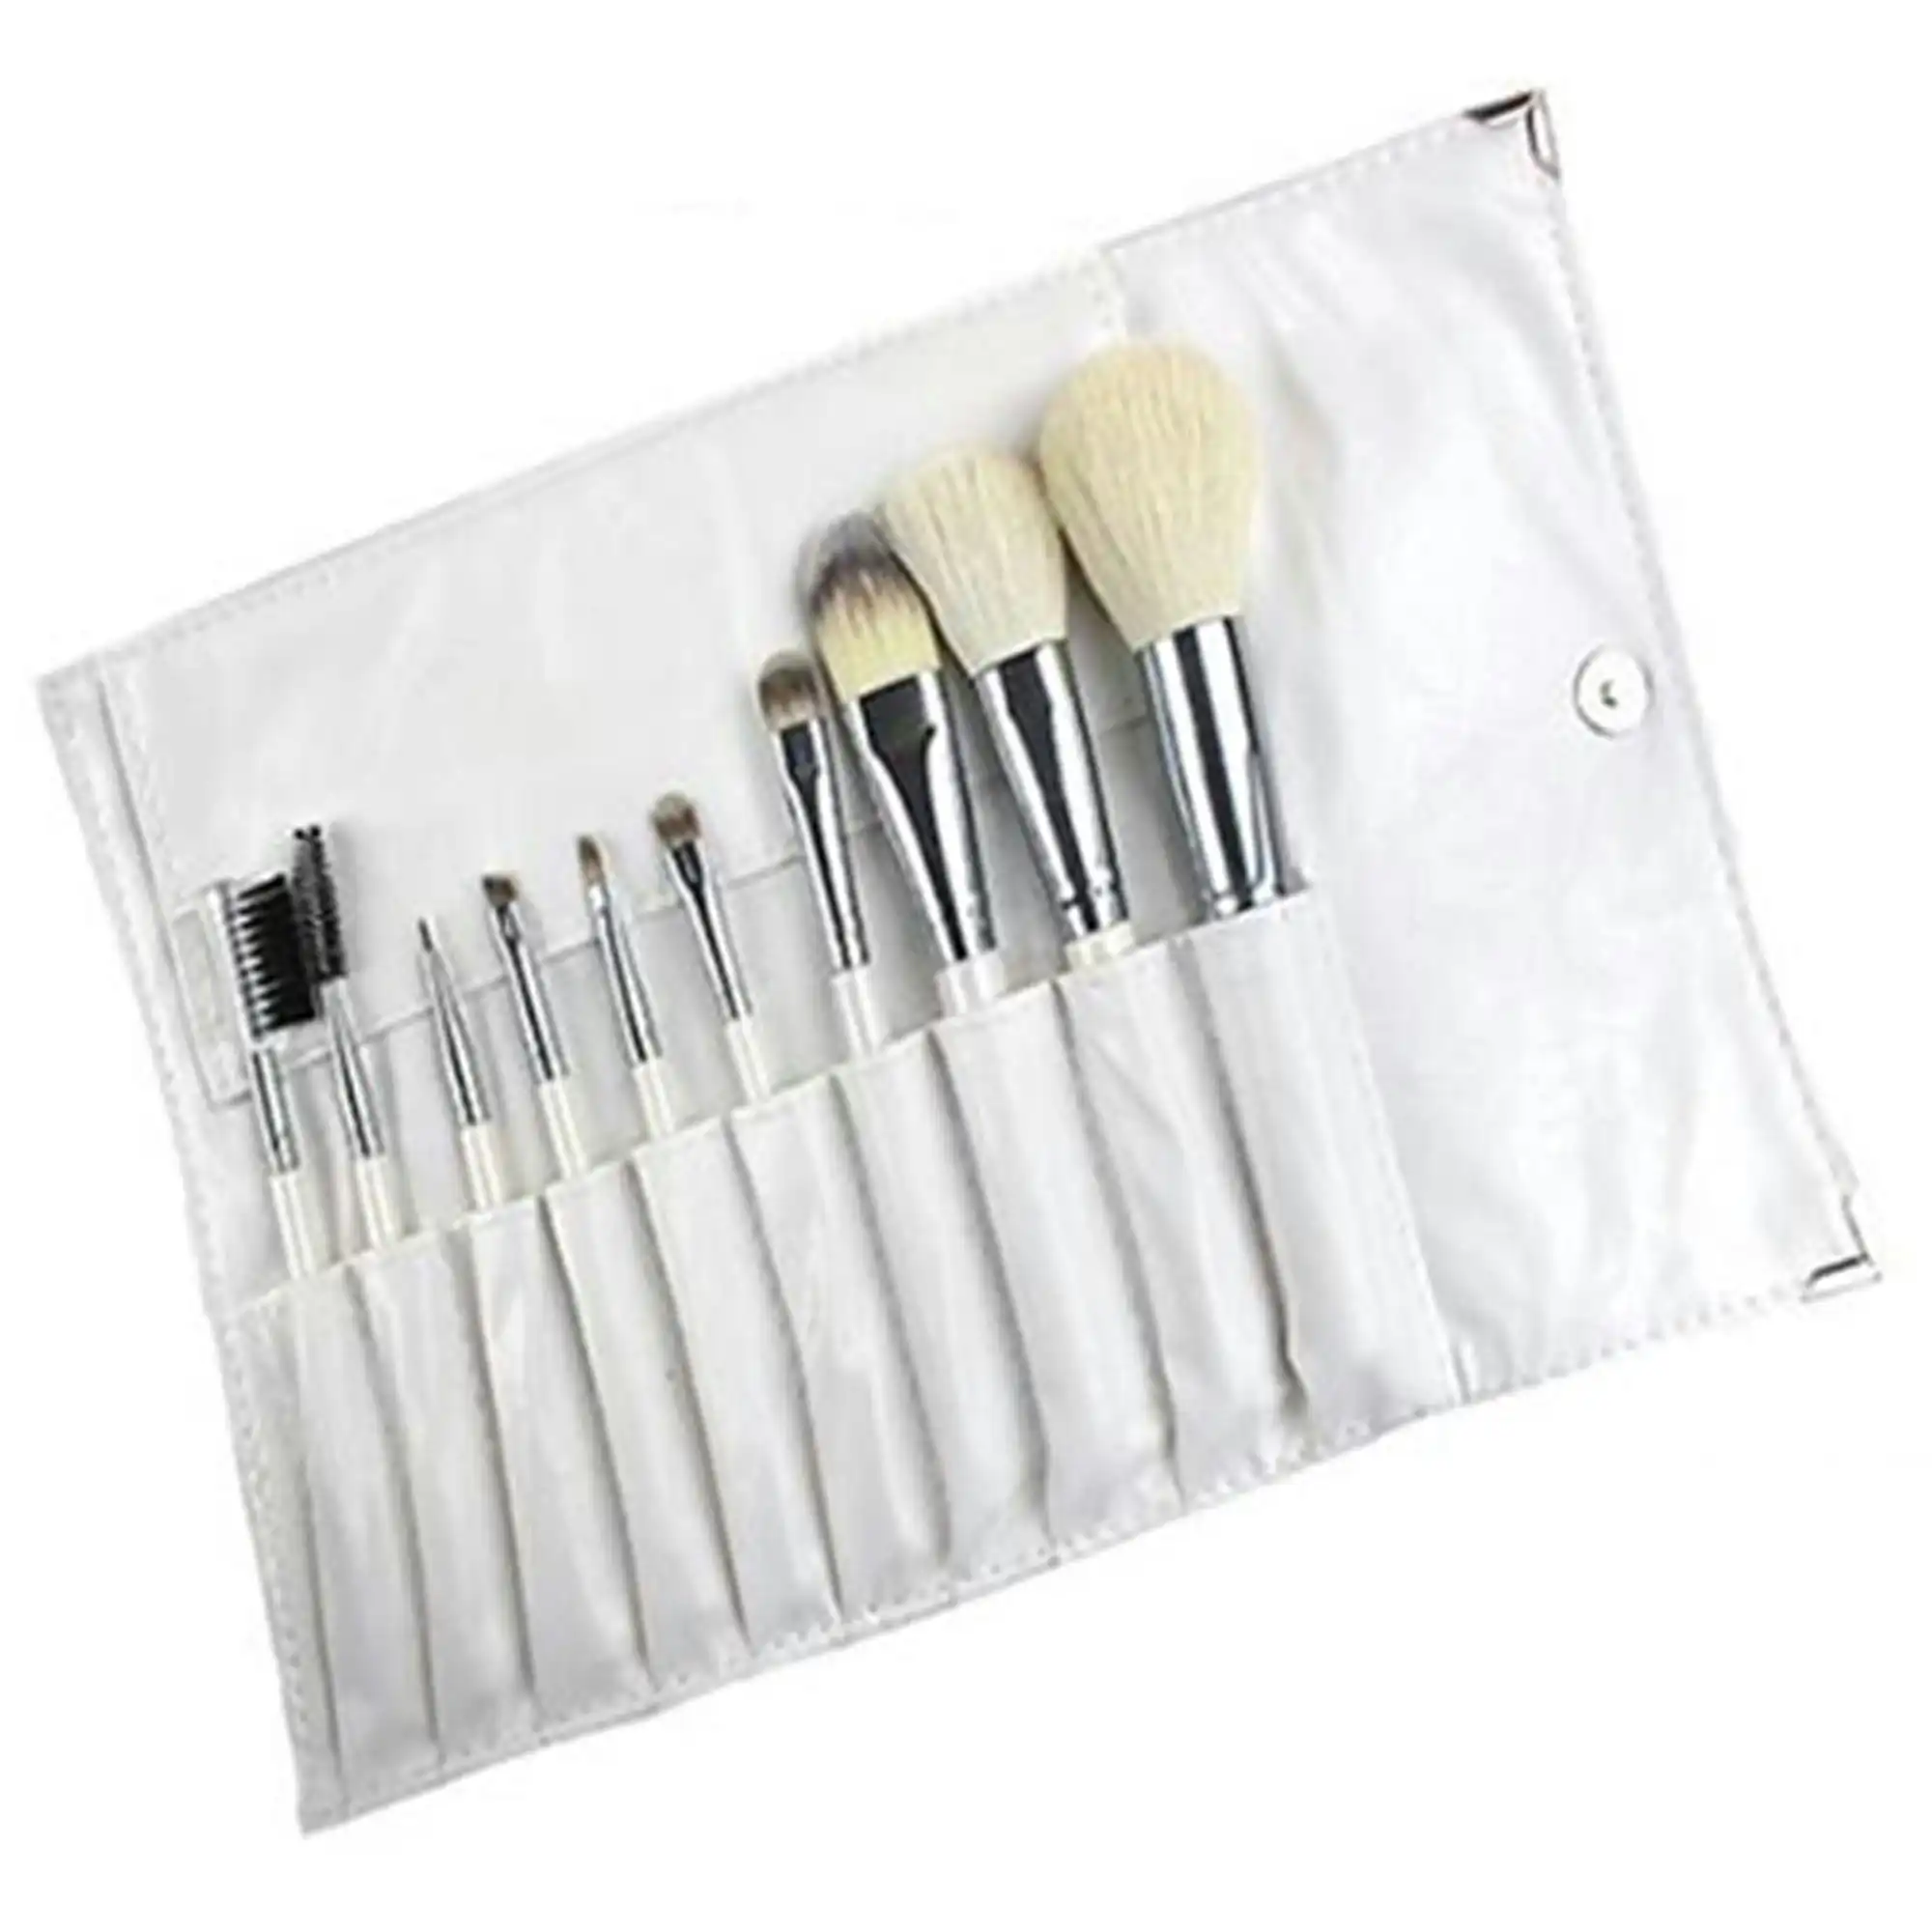 10 Piece Professional Makeup Brush Set Soft Bristle with Carry Case White